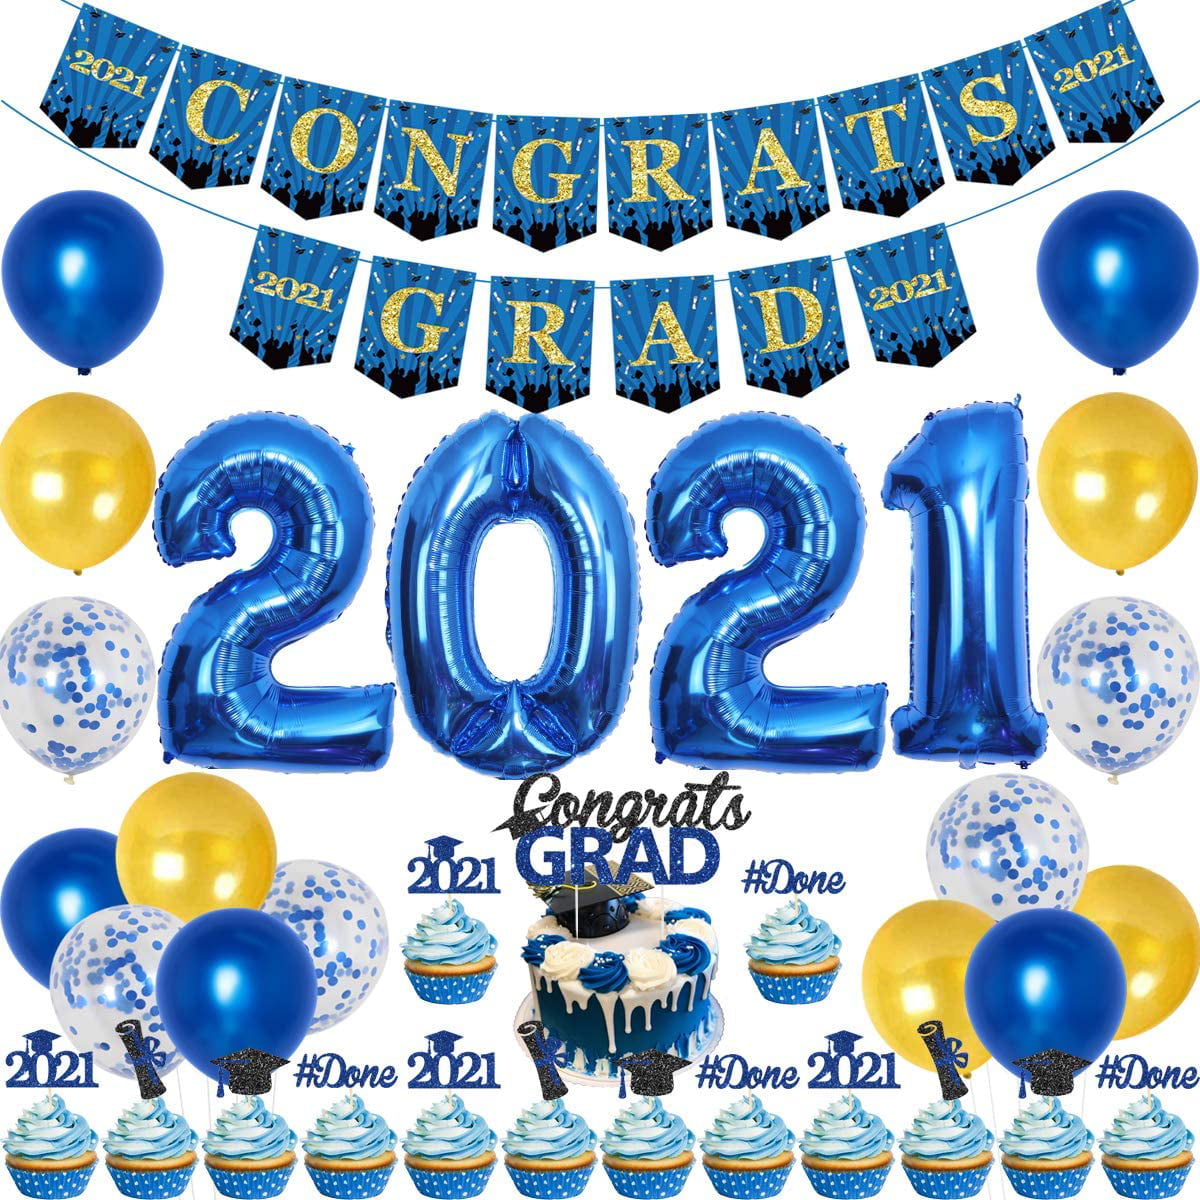 Congrats Grad Cake Topper for Class of 2021 Graduation Party Decorations,Funny Golden